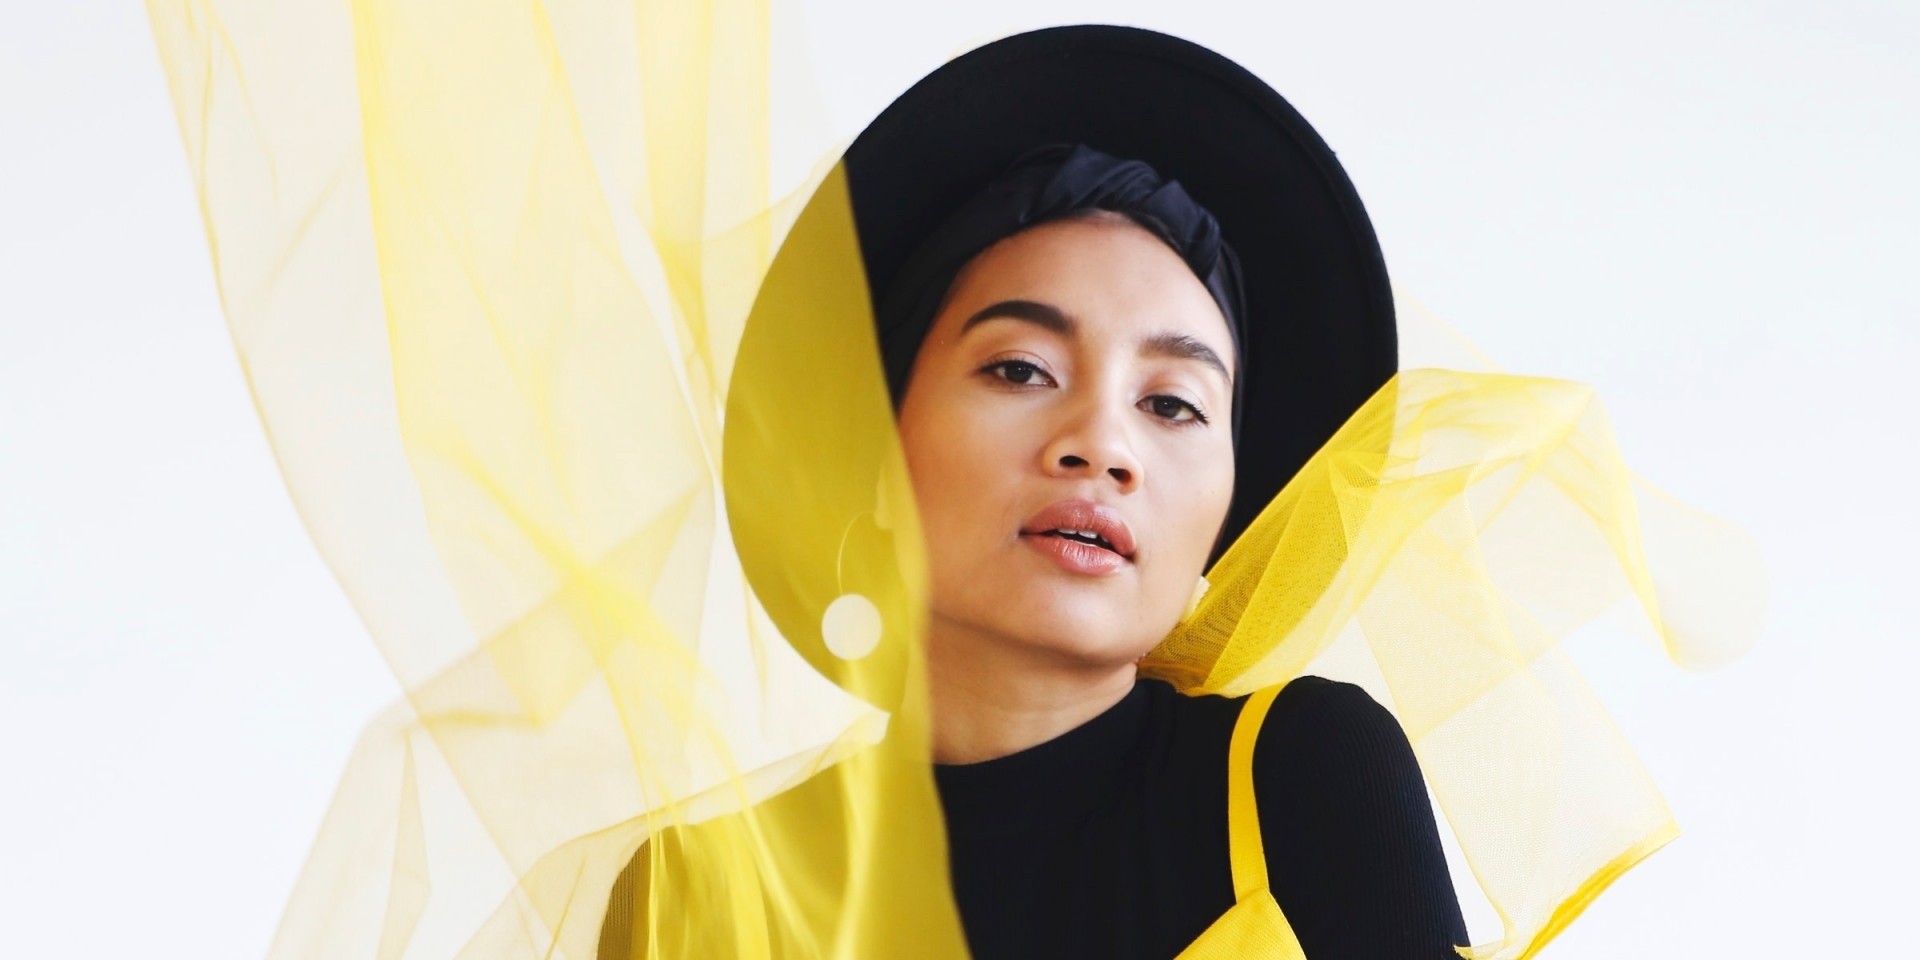 "I’m definitely going to whip out something cool and new for this set": Yuna speaks on her Neon Lights return